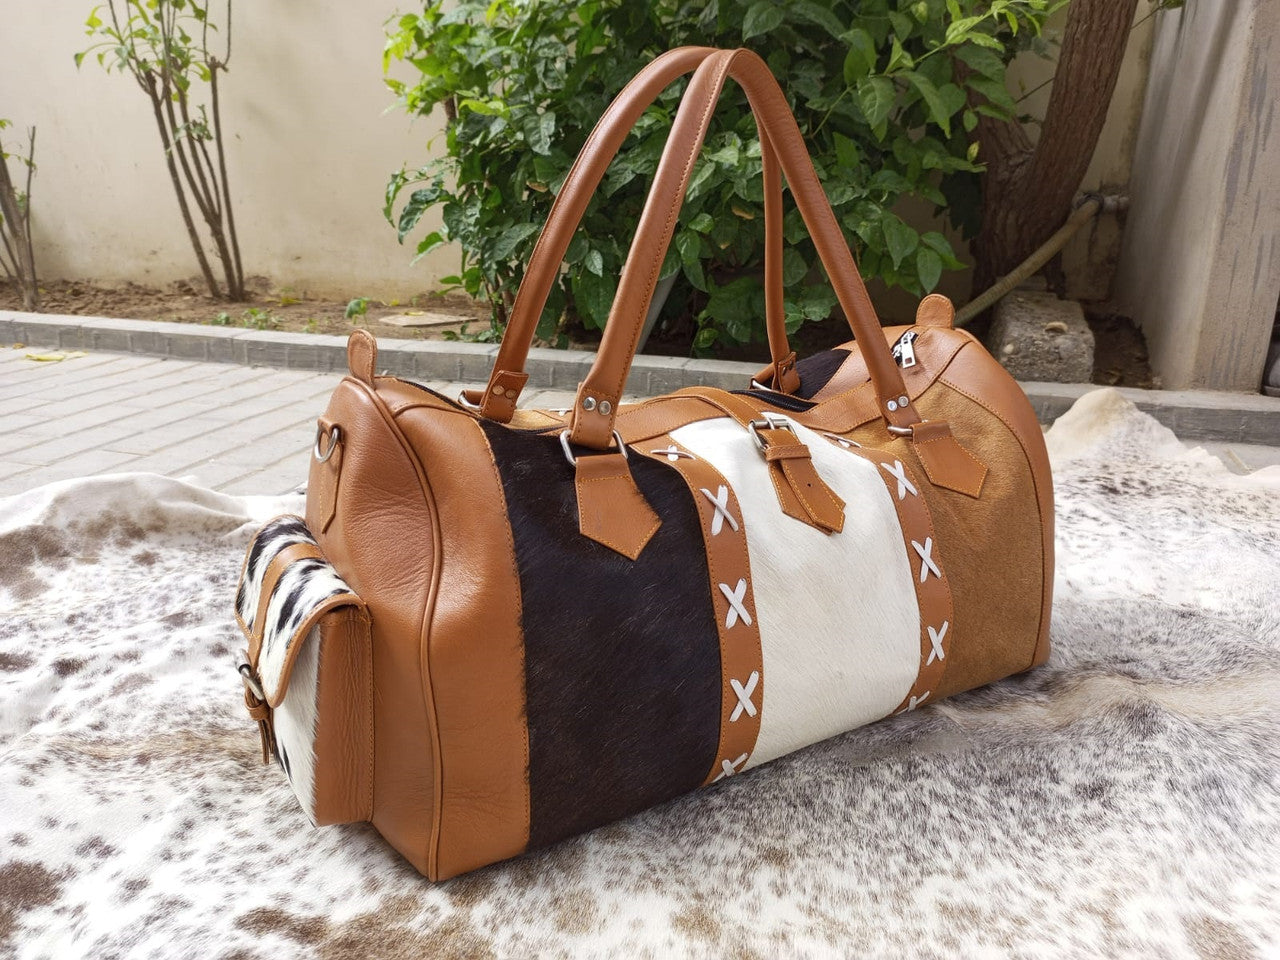 Discover the perfect custom cowhide duffle bag to elevate your travel style. Ideal for backpacking and weekend getaways, expertly crafted for your adventures.